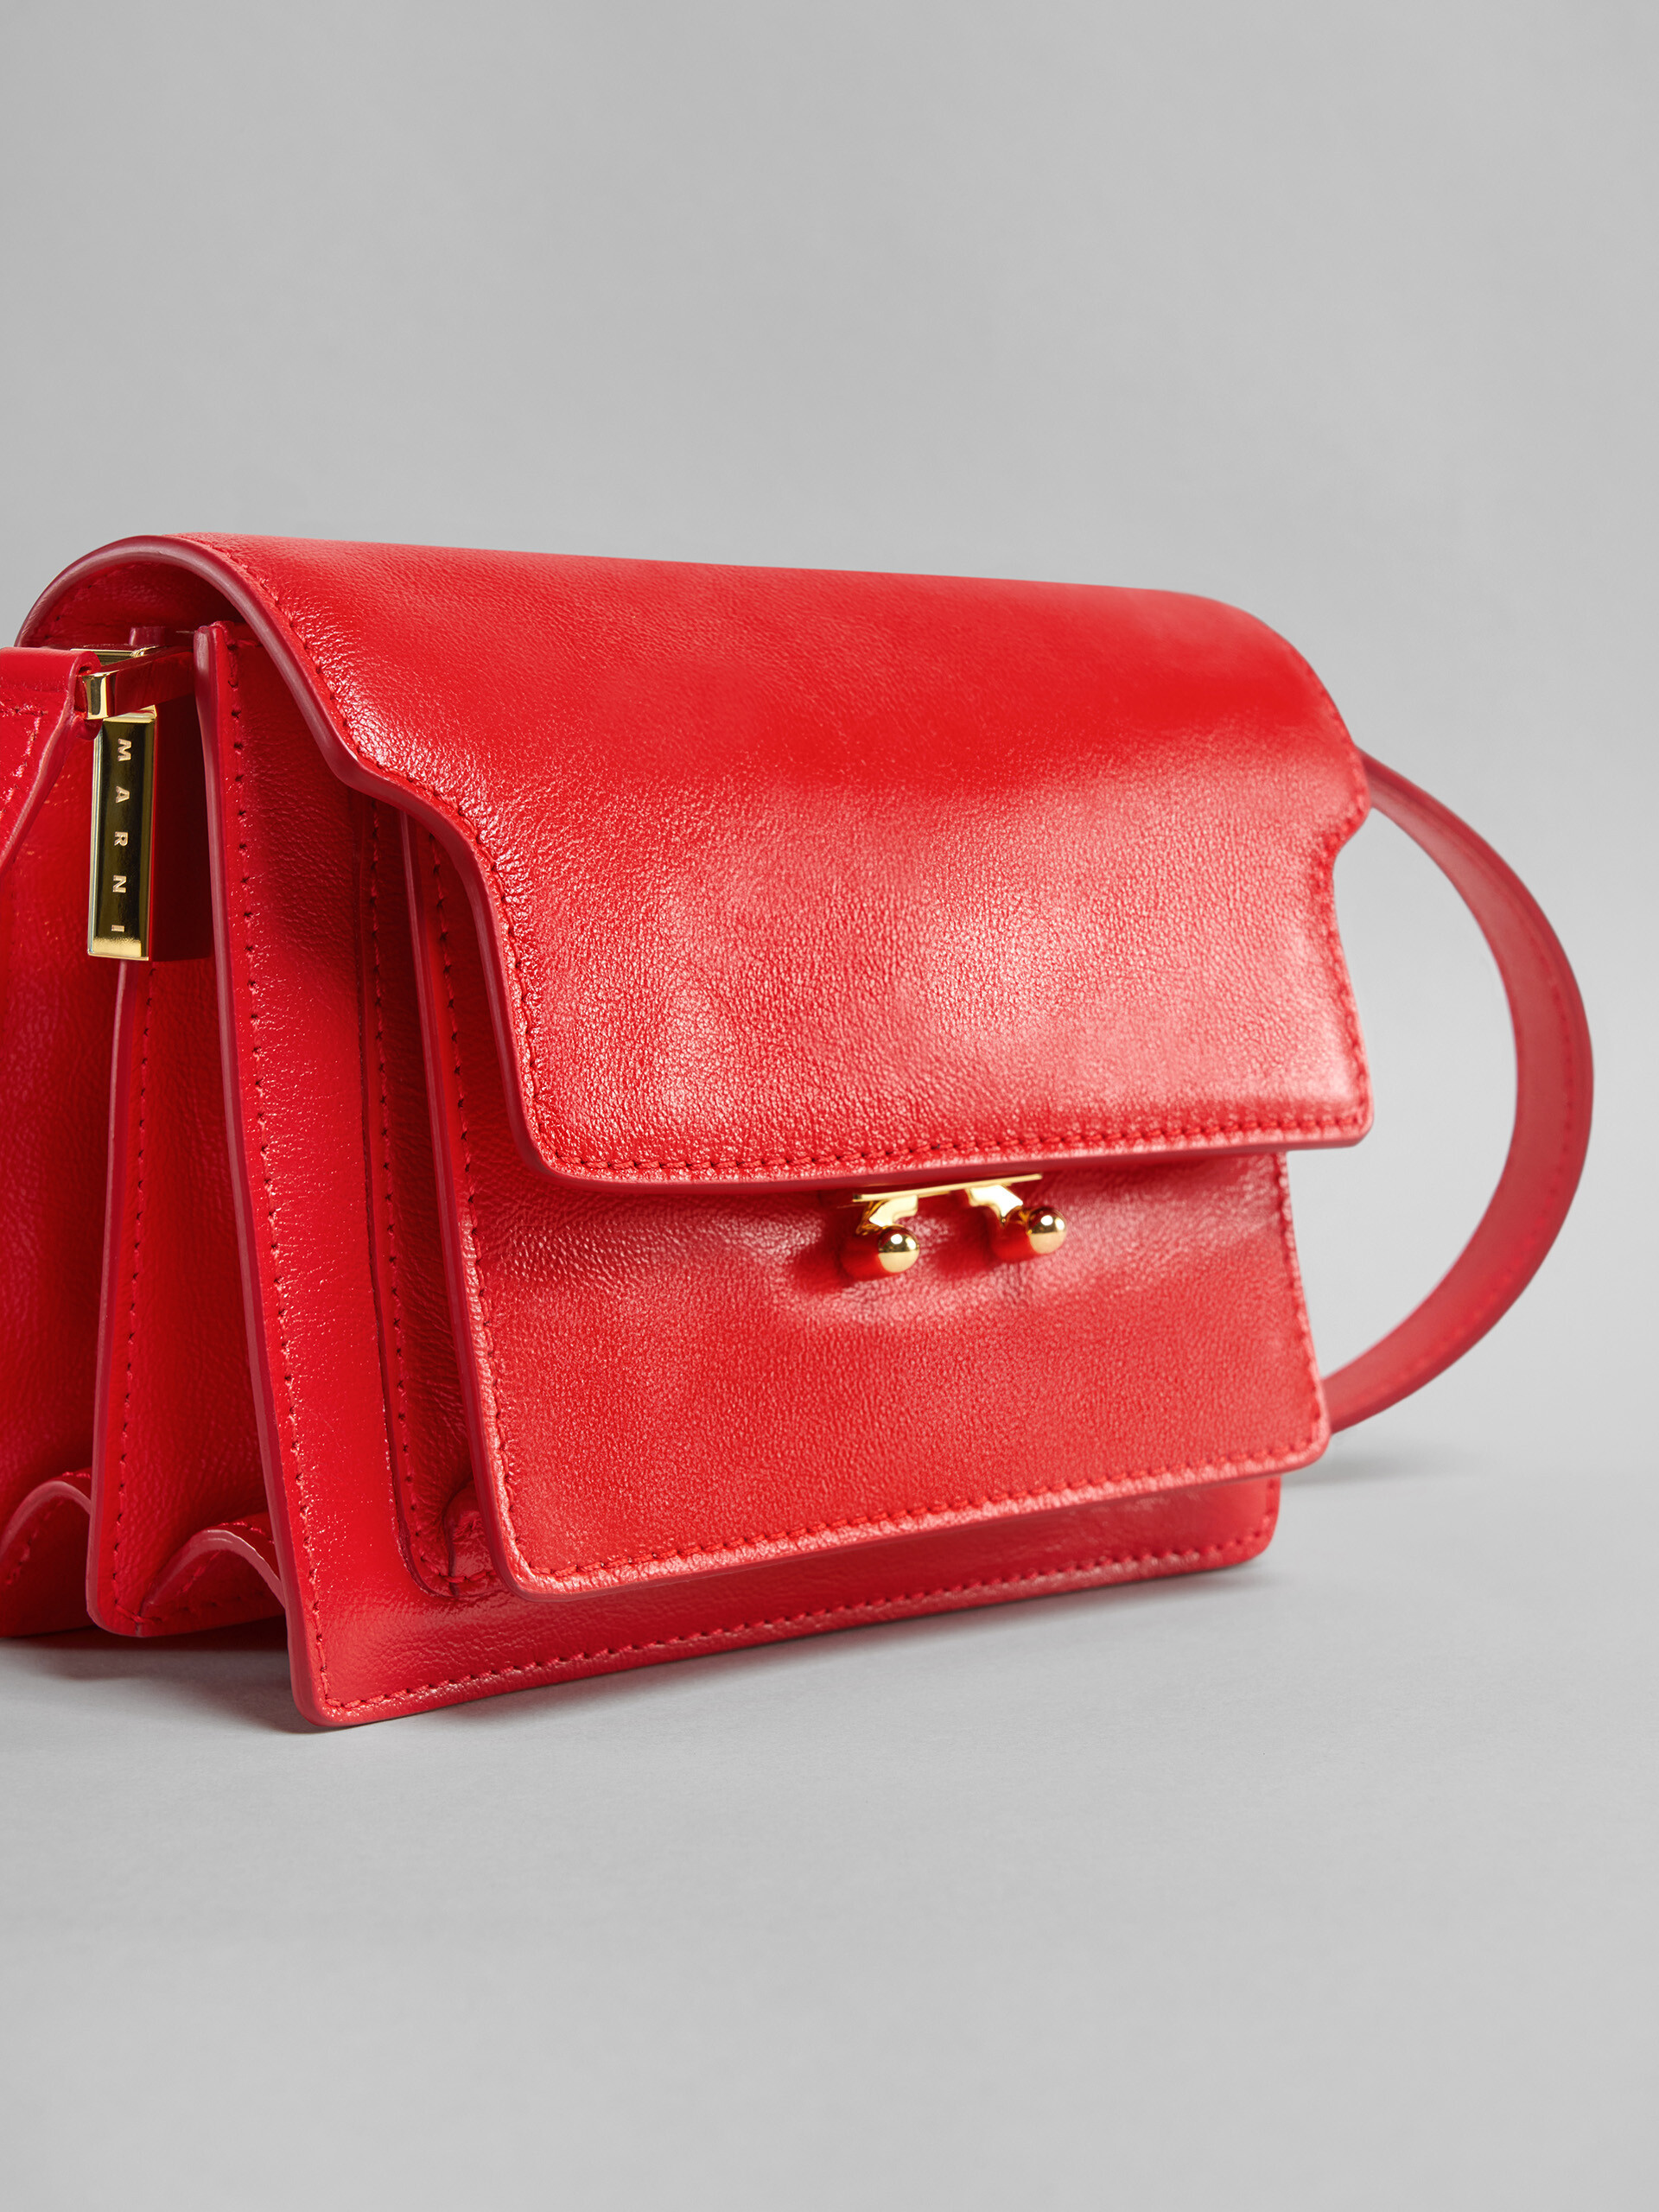 TRUNK SOFT mini bag in red leather - Shoulder Bags - Image 5